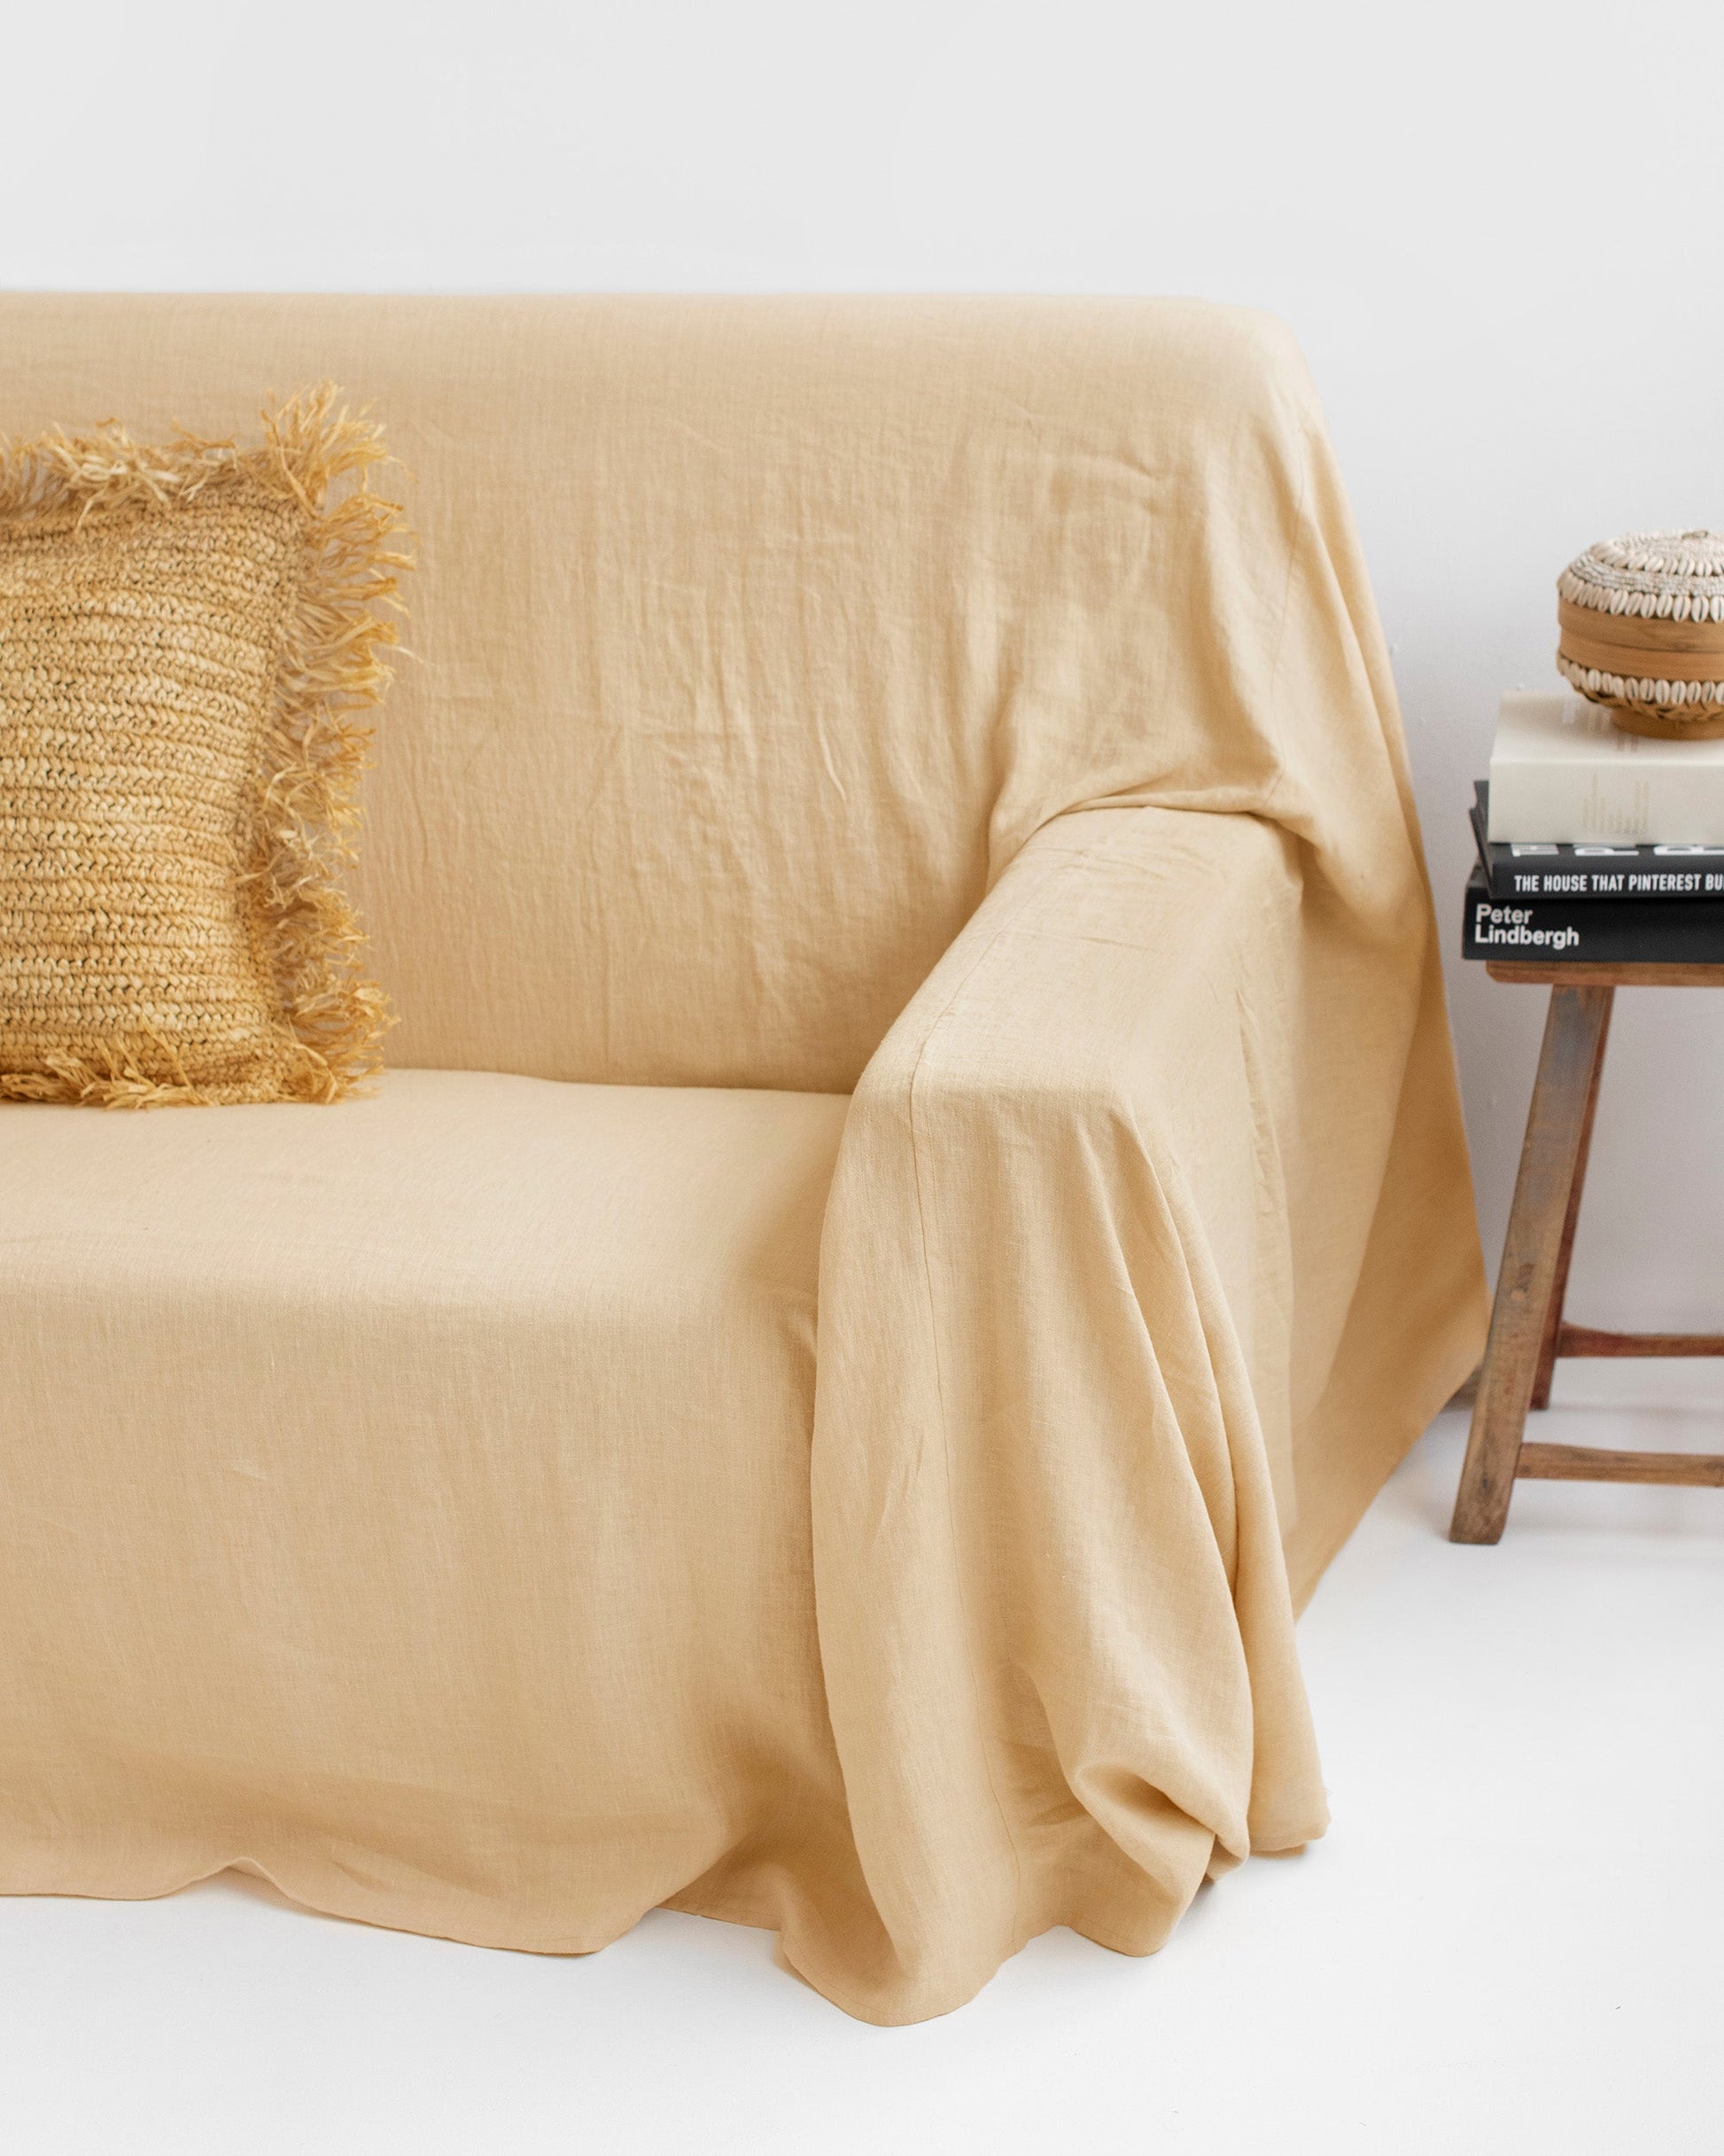 Custom size linen couch cover in Sandy beige - MagicLinen